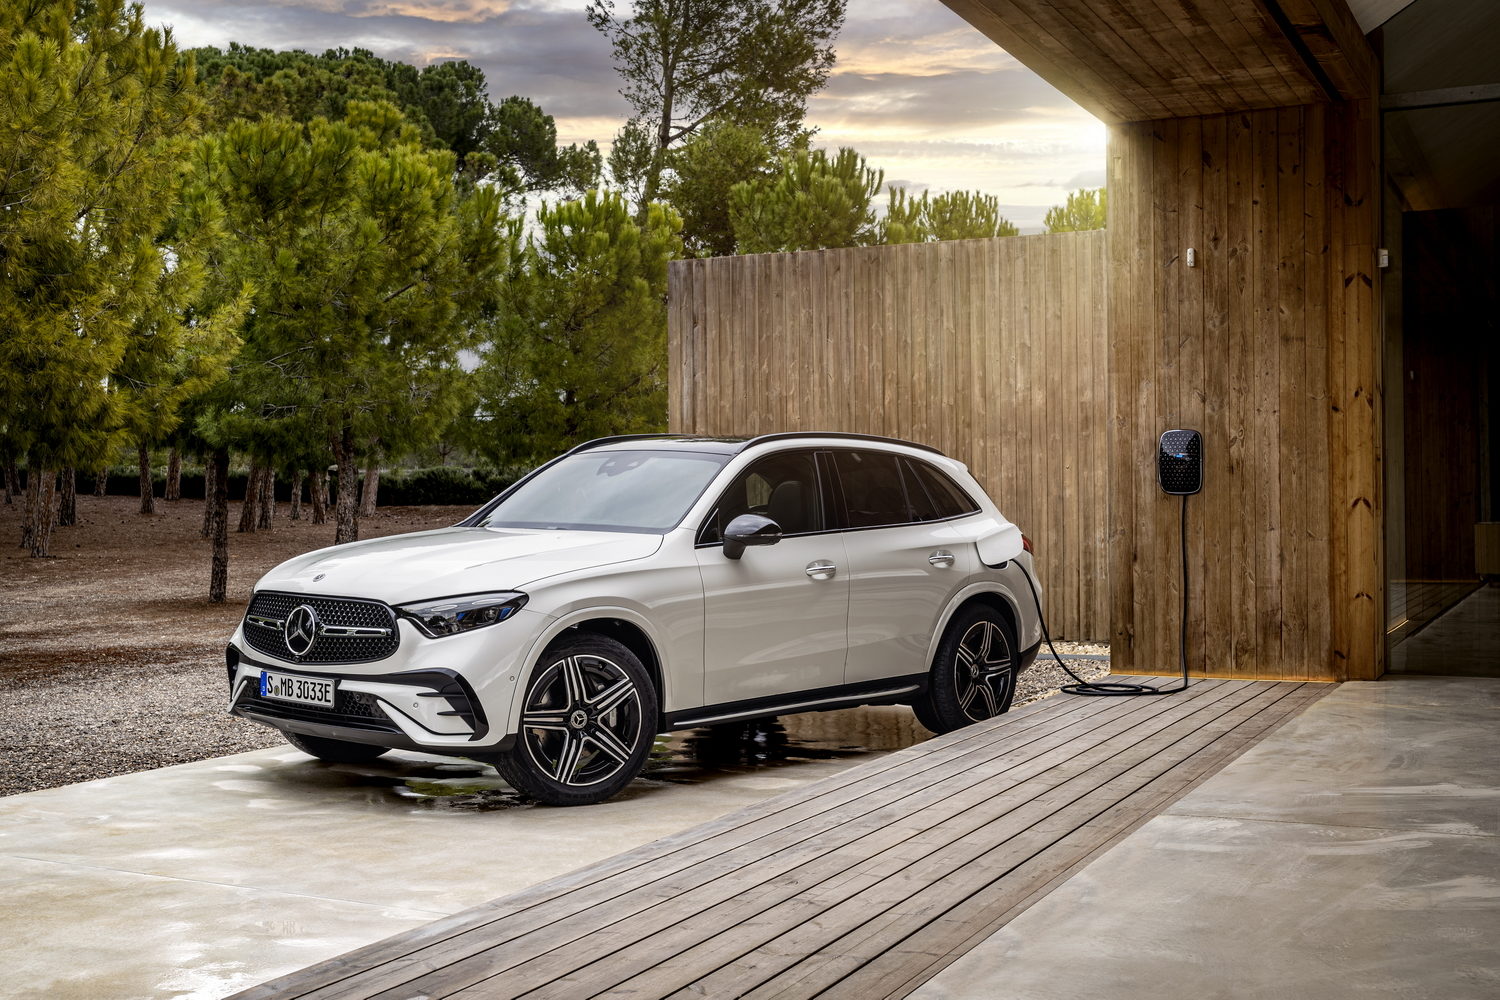 Car News | New Mercedes-Benz GLC has arrived in Ireland | CompleteCar.ie